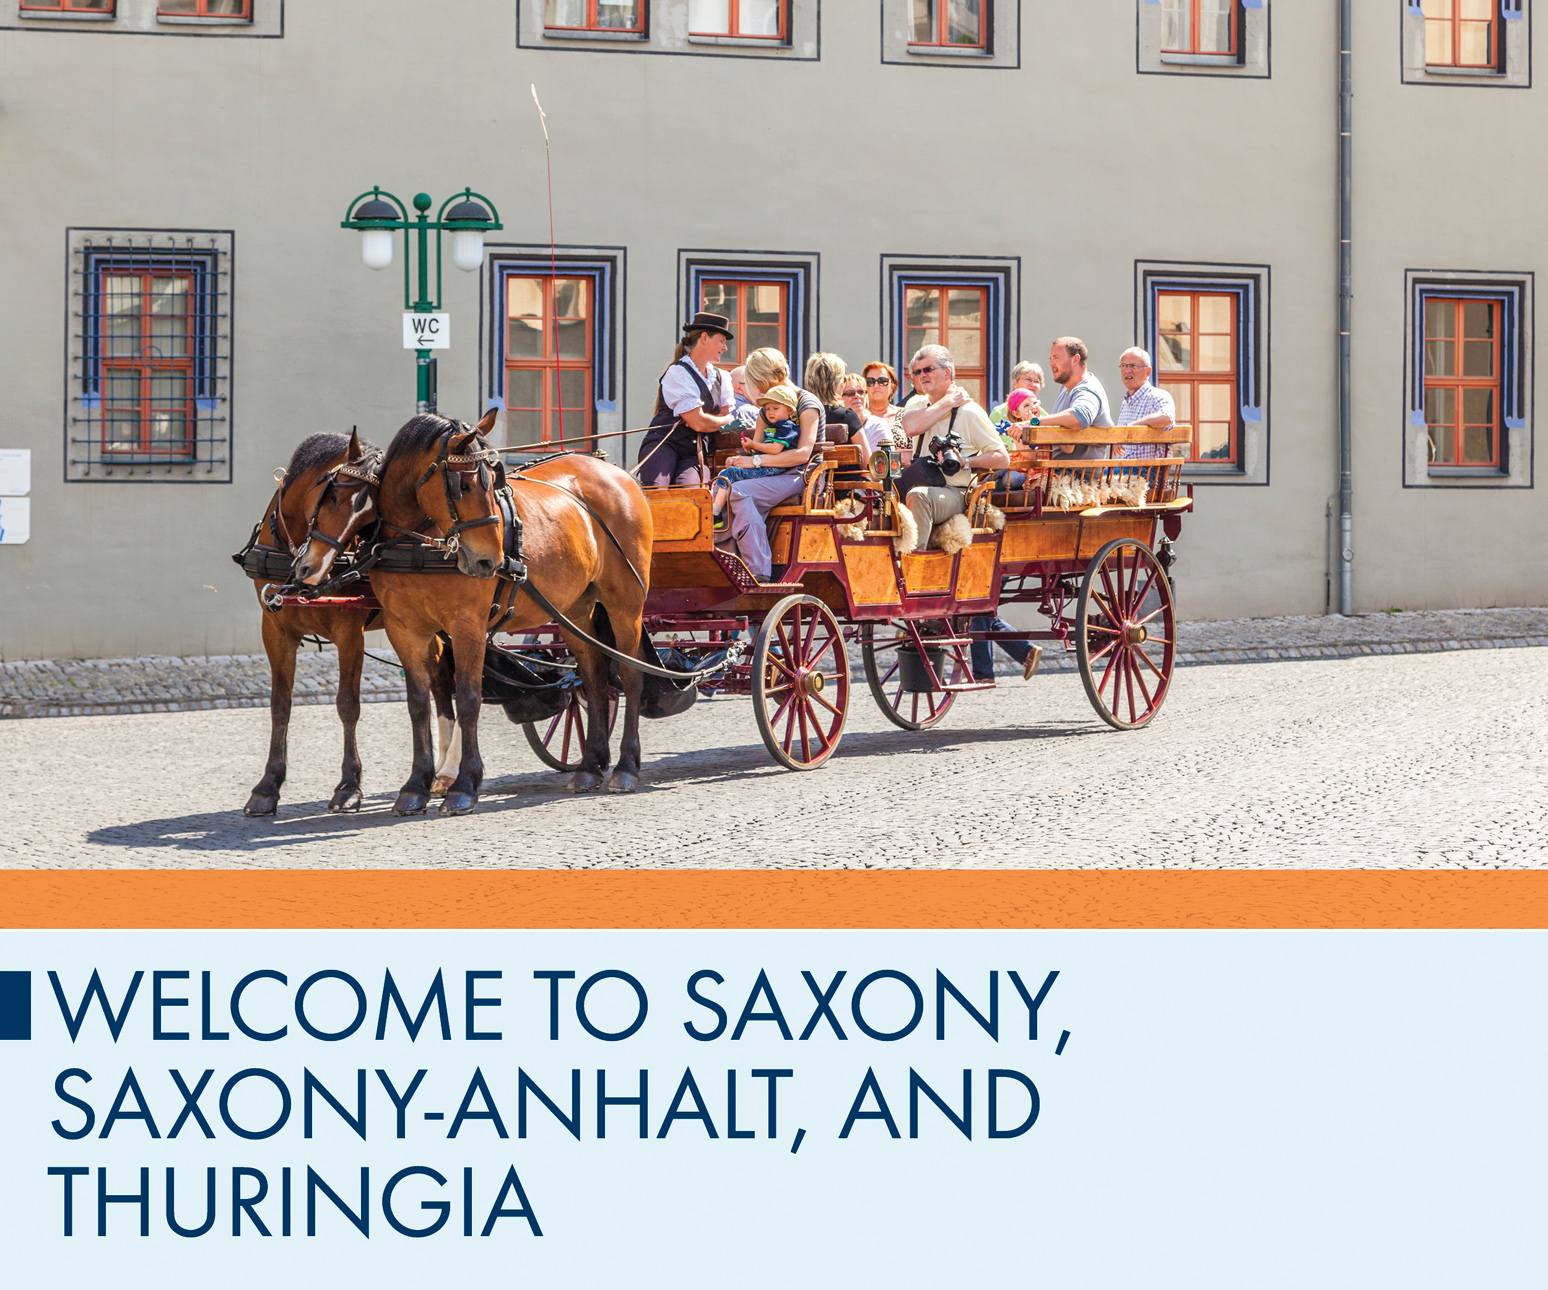 Welcome to Saxony, Saxony-Anhalt, and Thuringia